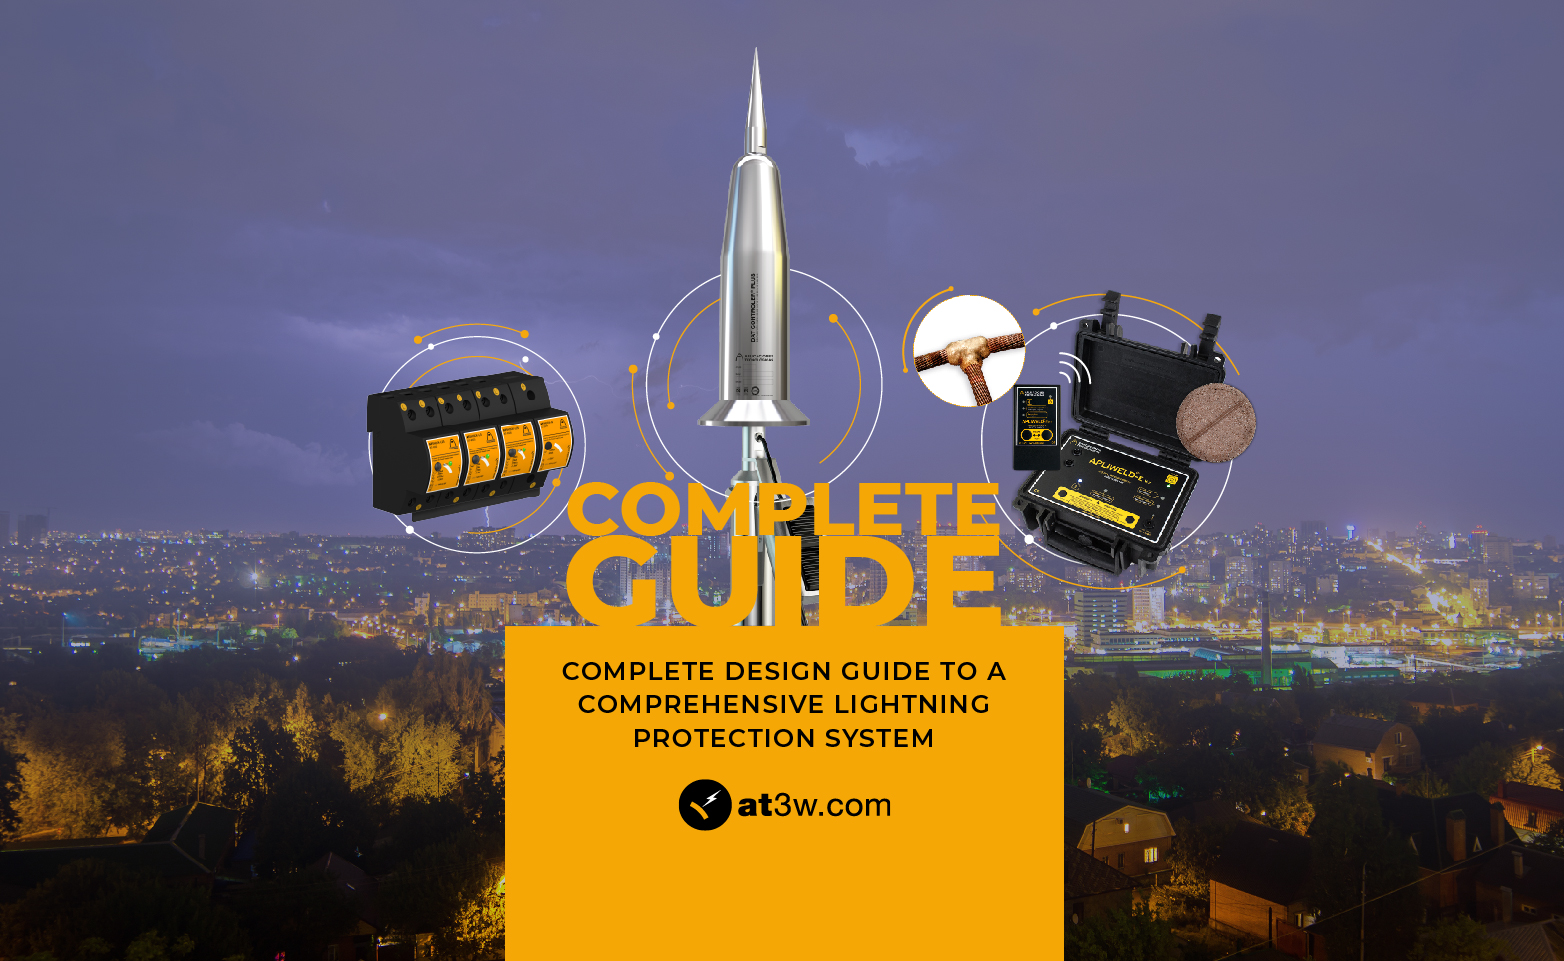 Complete design guide to a comprehensive lightning protection system